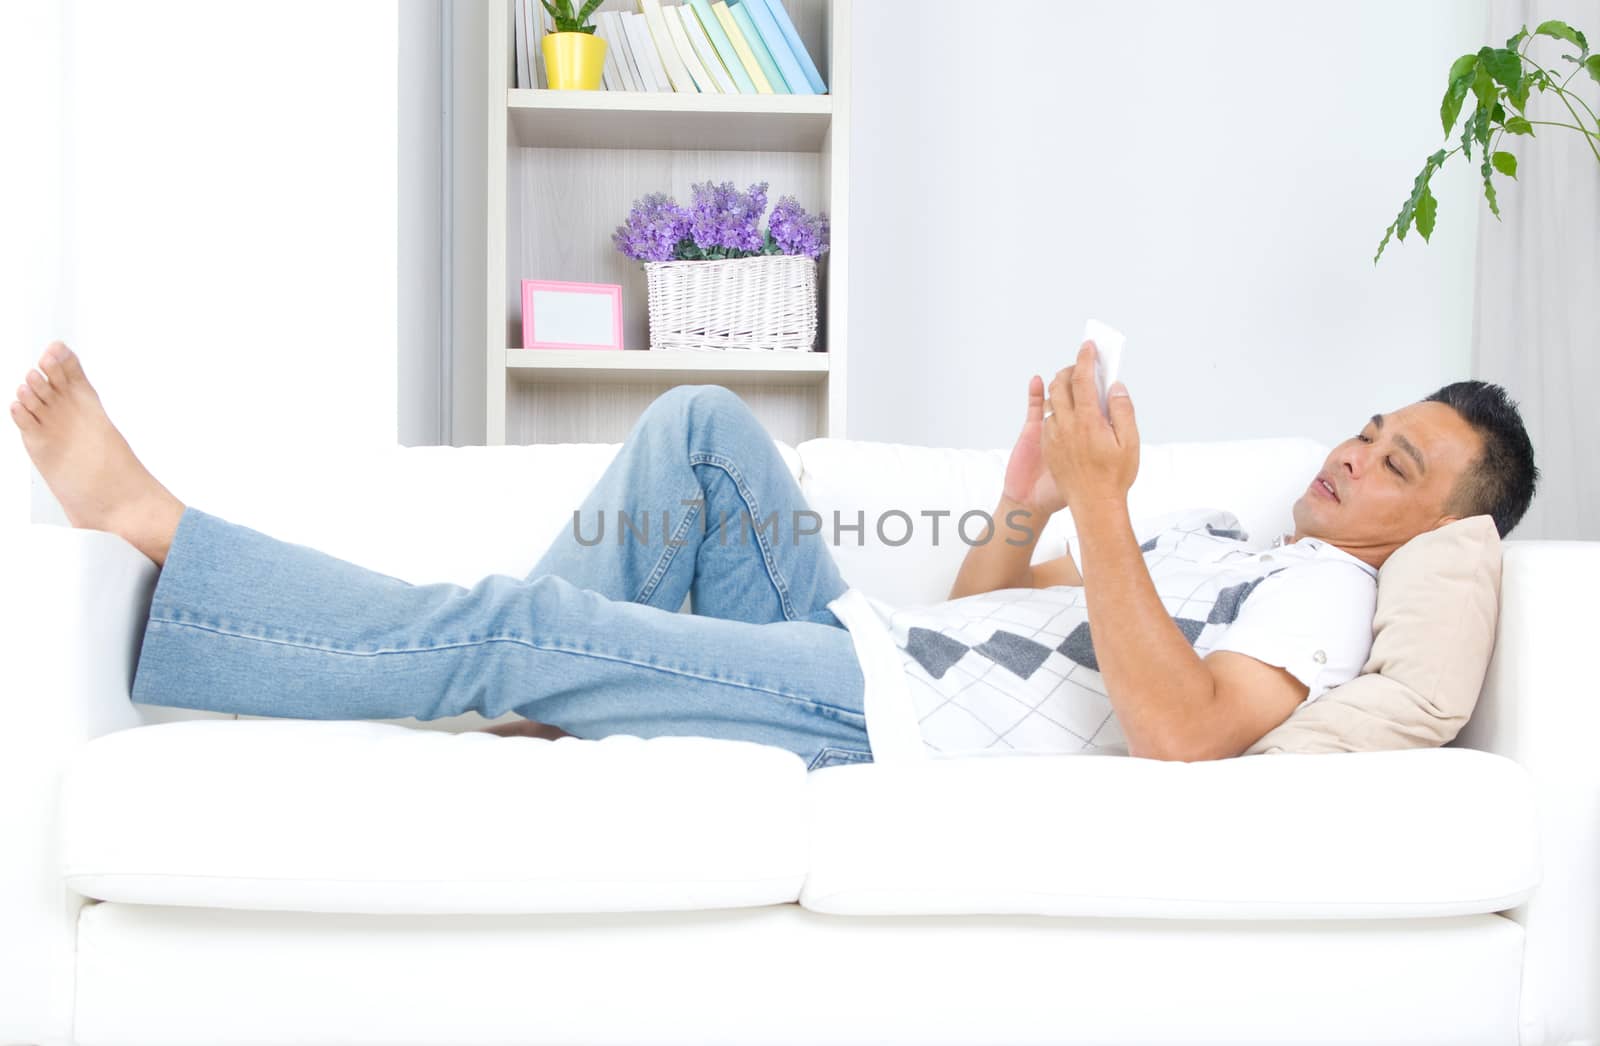 Smartphone mobile apps concept. Malay guy using smart phone. Handsome asian man relaxed and lying on sofa indoor.